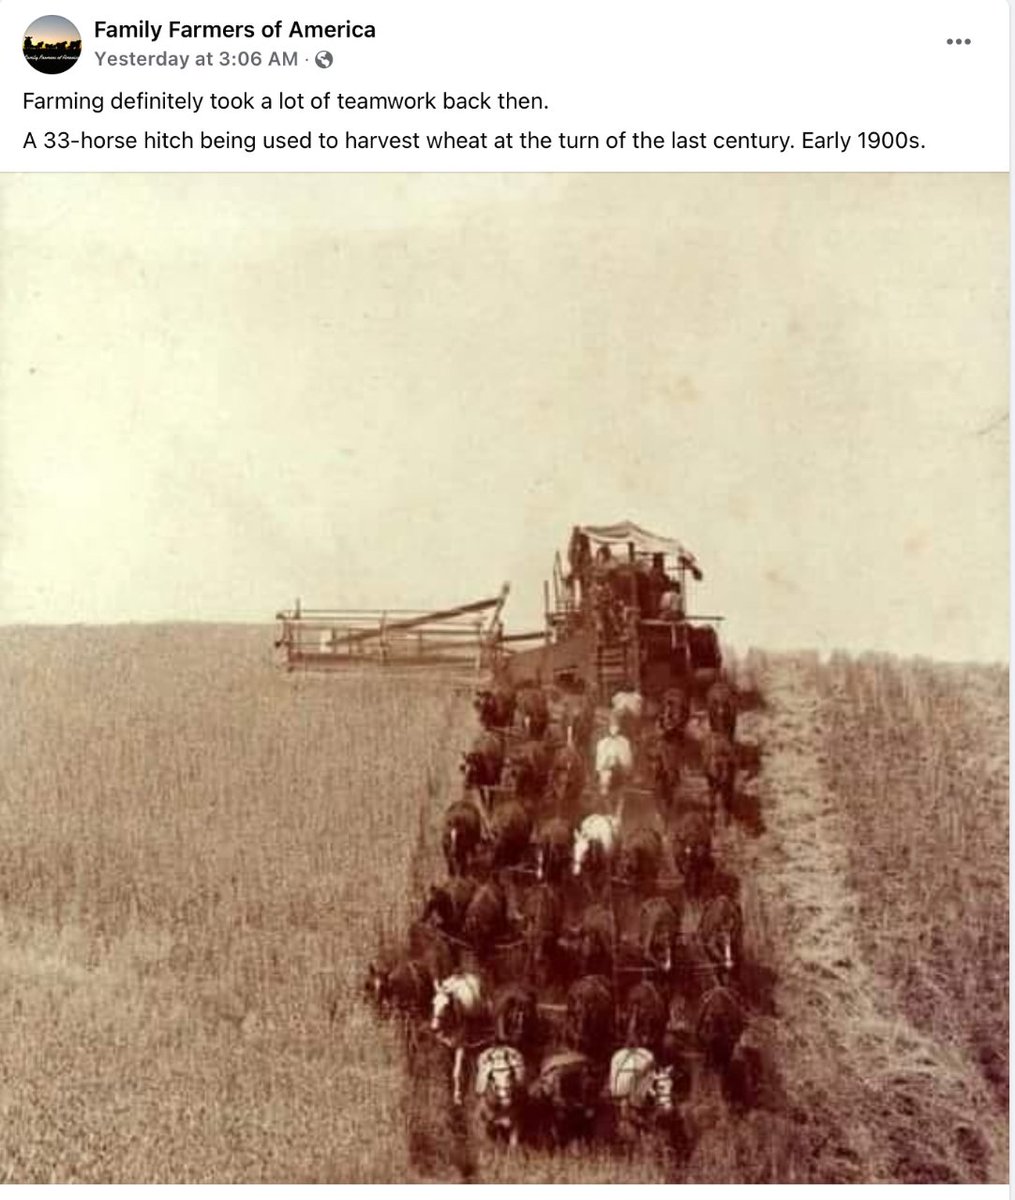 Absolutely incredible. Let us never forget our roots and the long, hard road it took to get to the farmscape as we know it today.